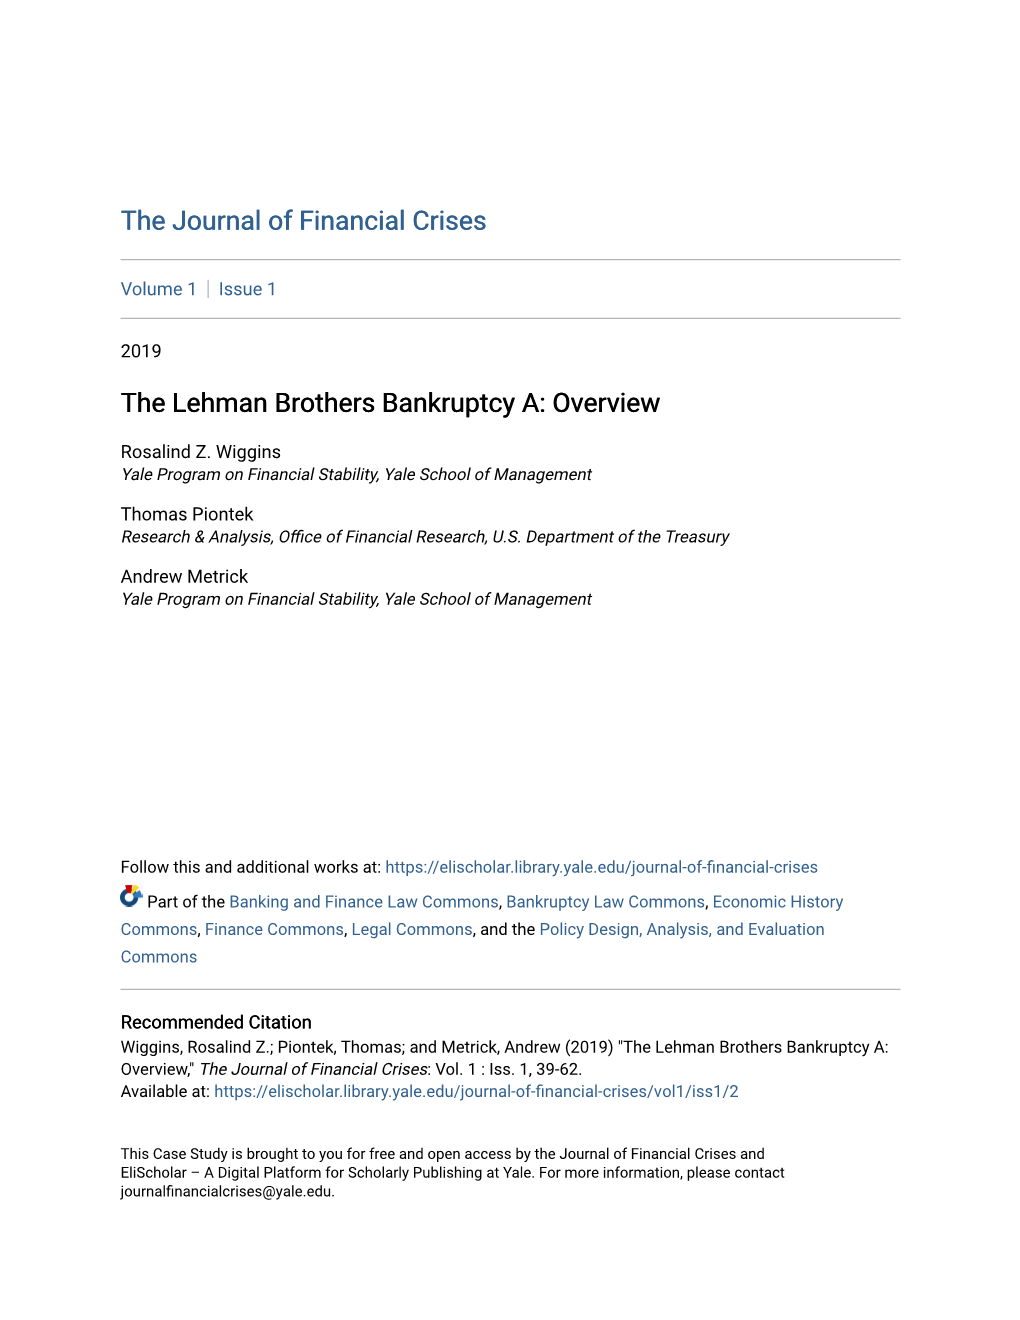 The Lehman Brothers Bankruptcy A: Overview